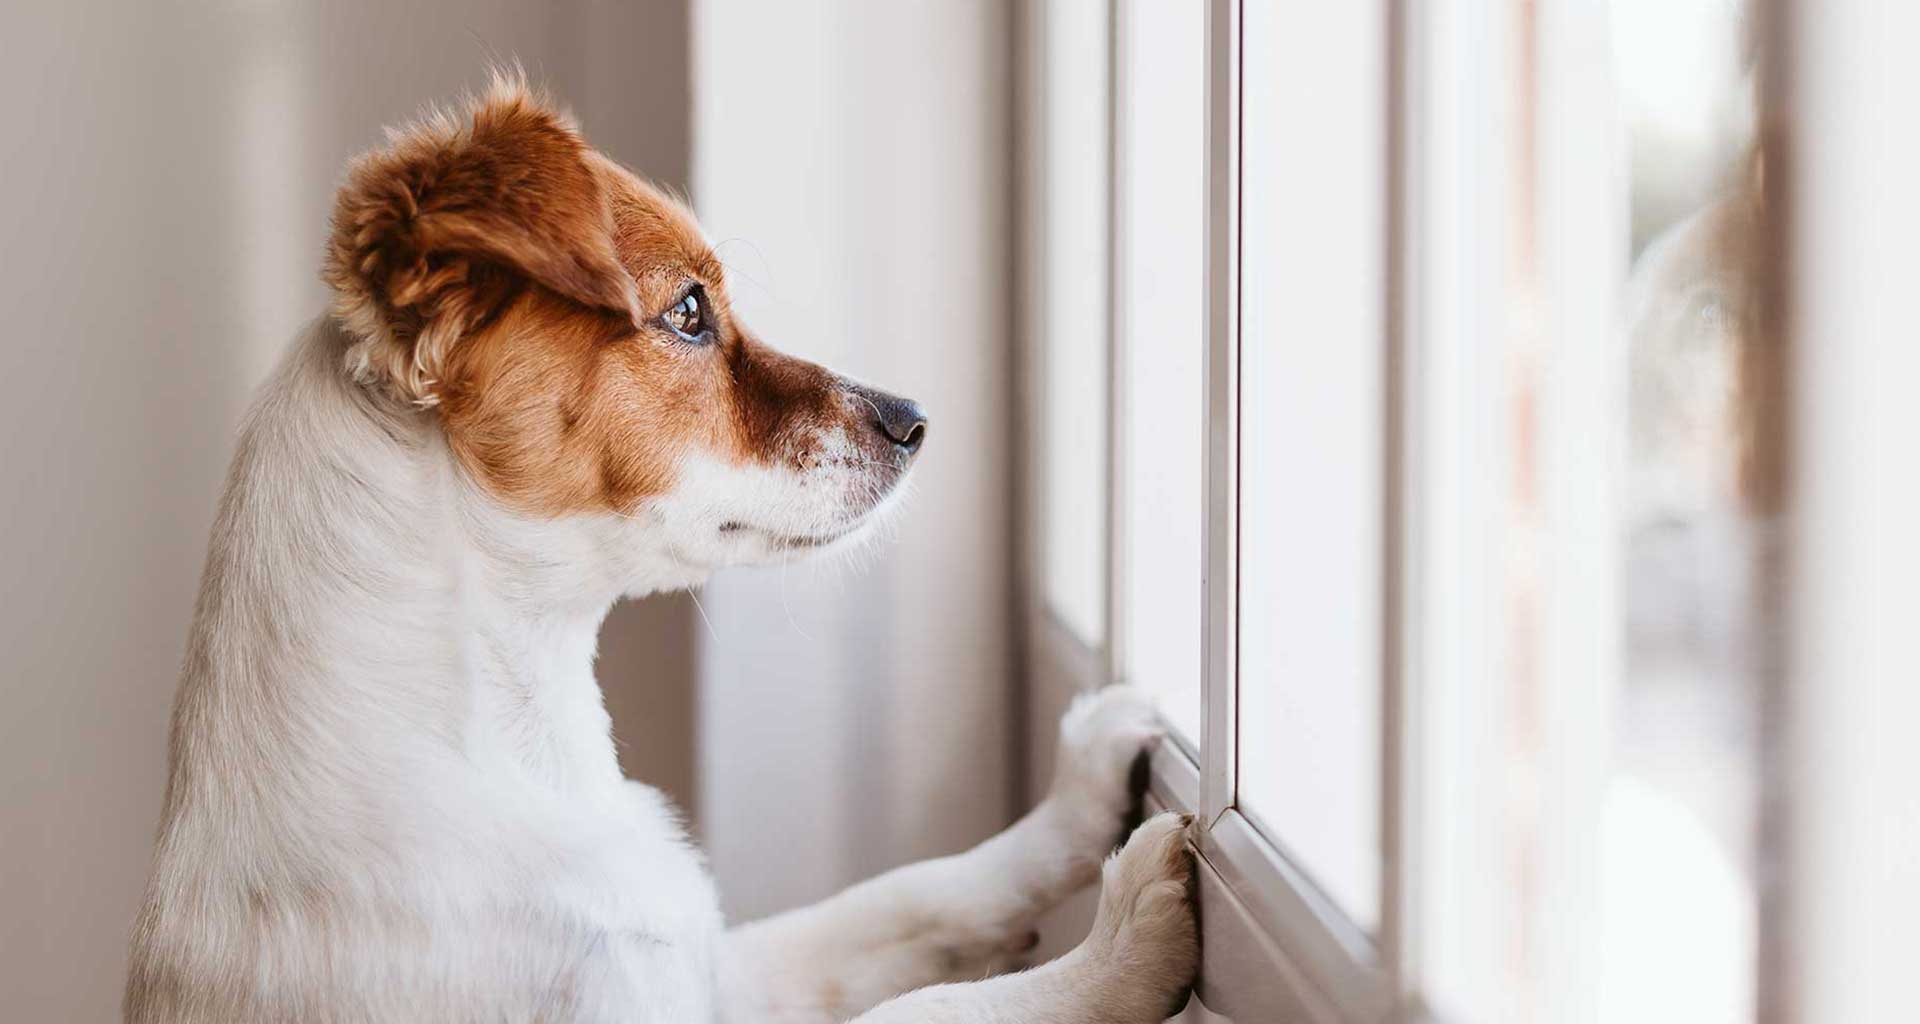 Does your pet have separation anxiety?